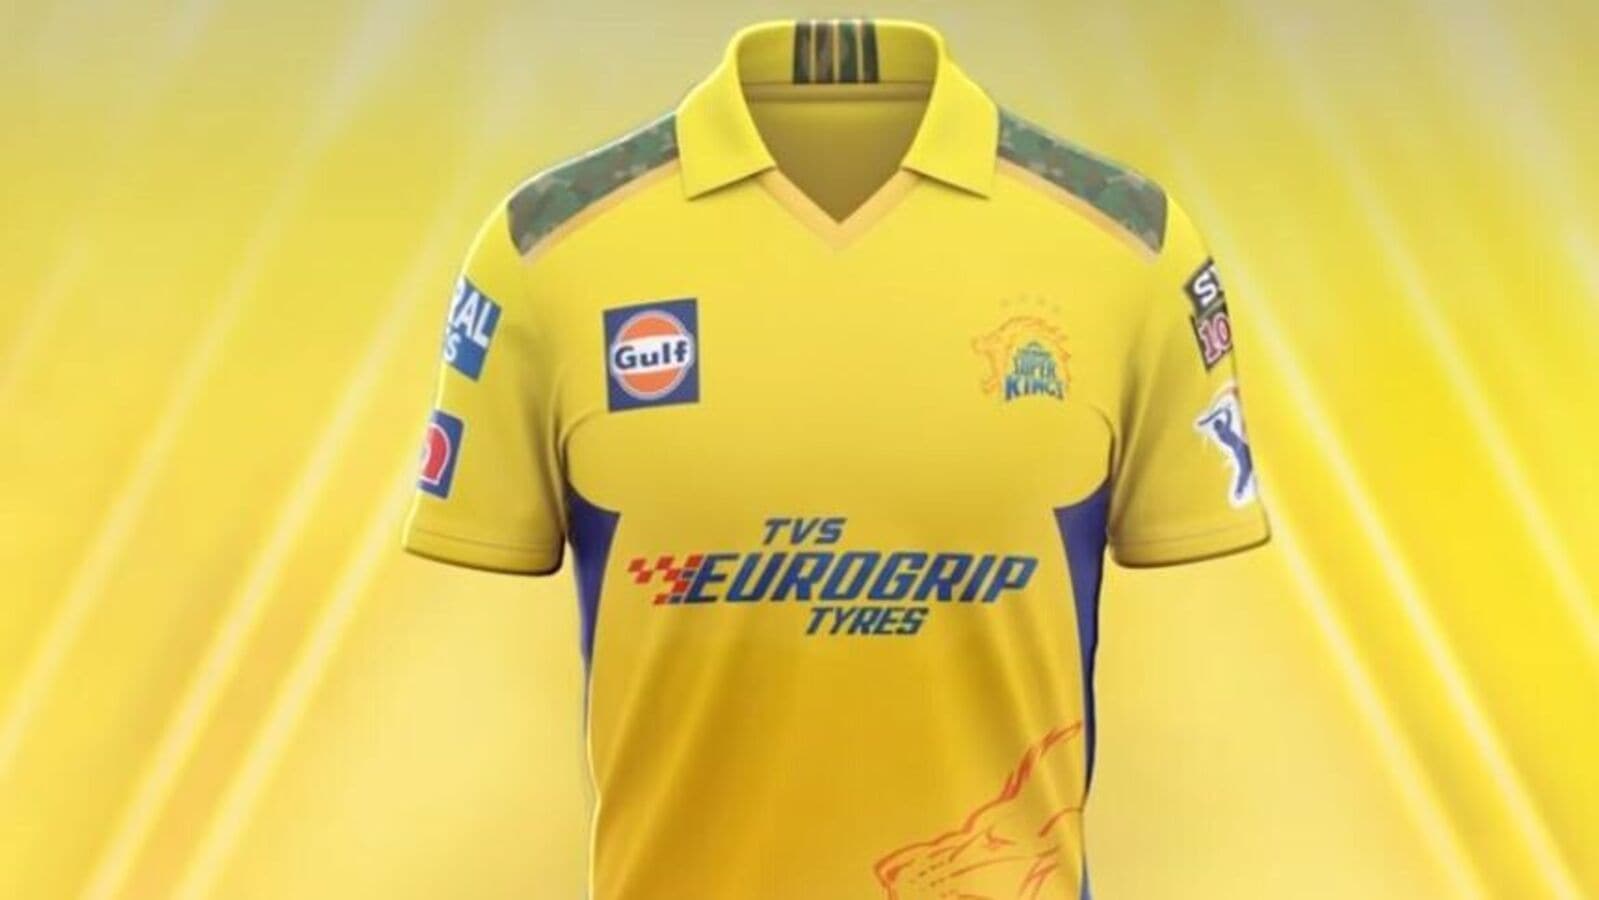 Chennai Super Kings jersey for IPL 2022 revealed, complete with TVS